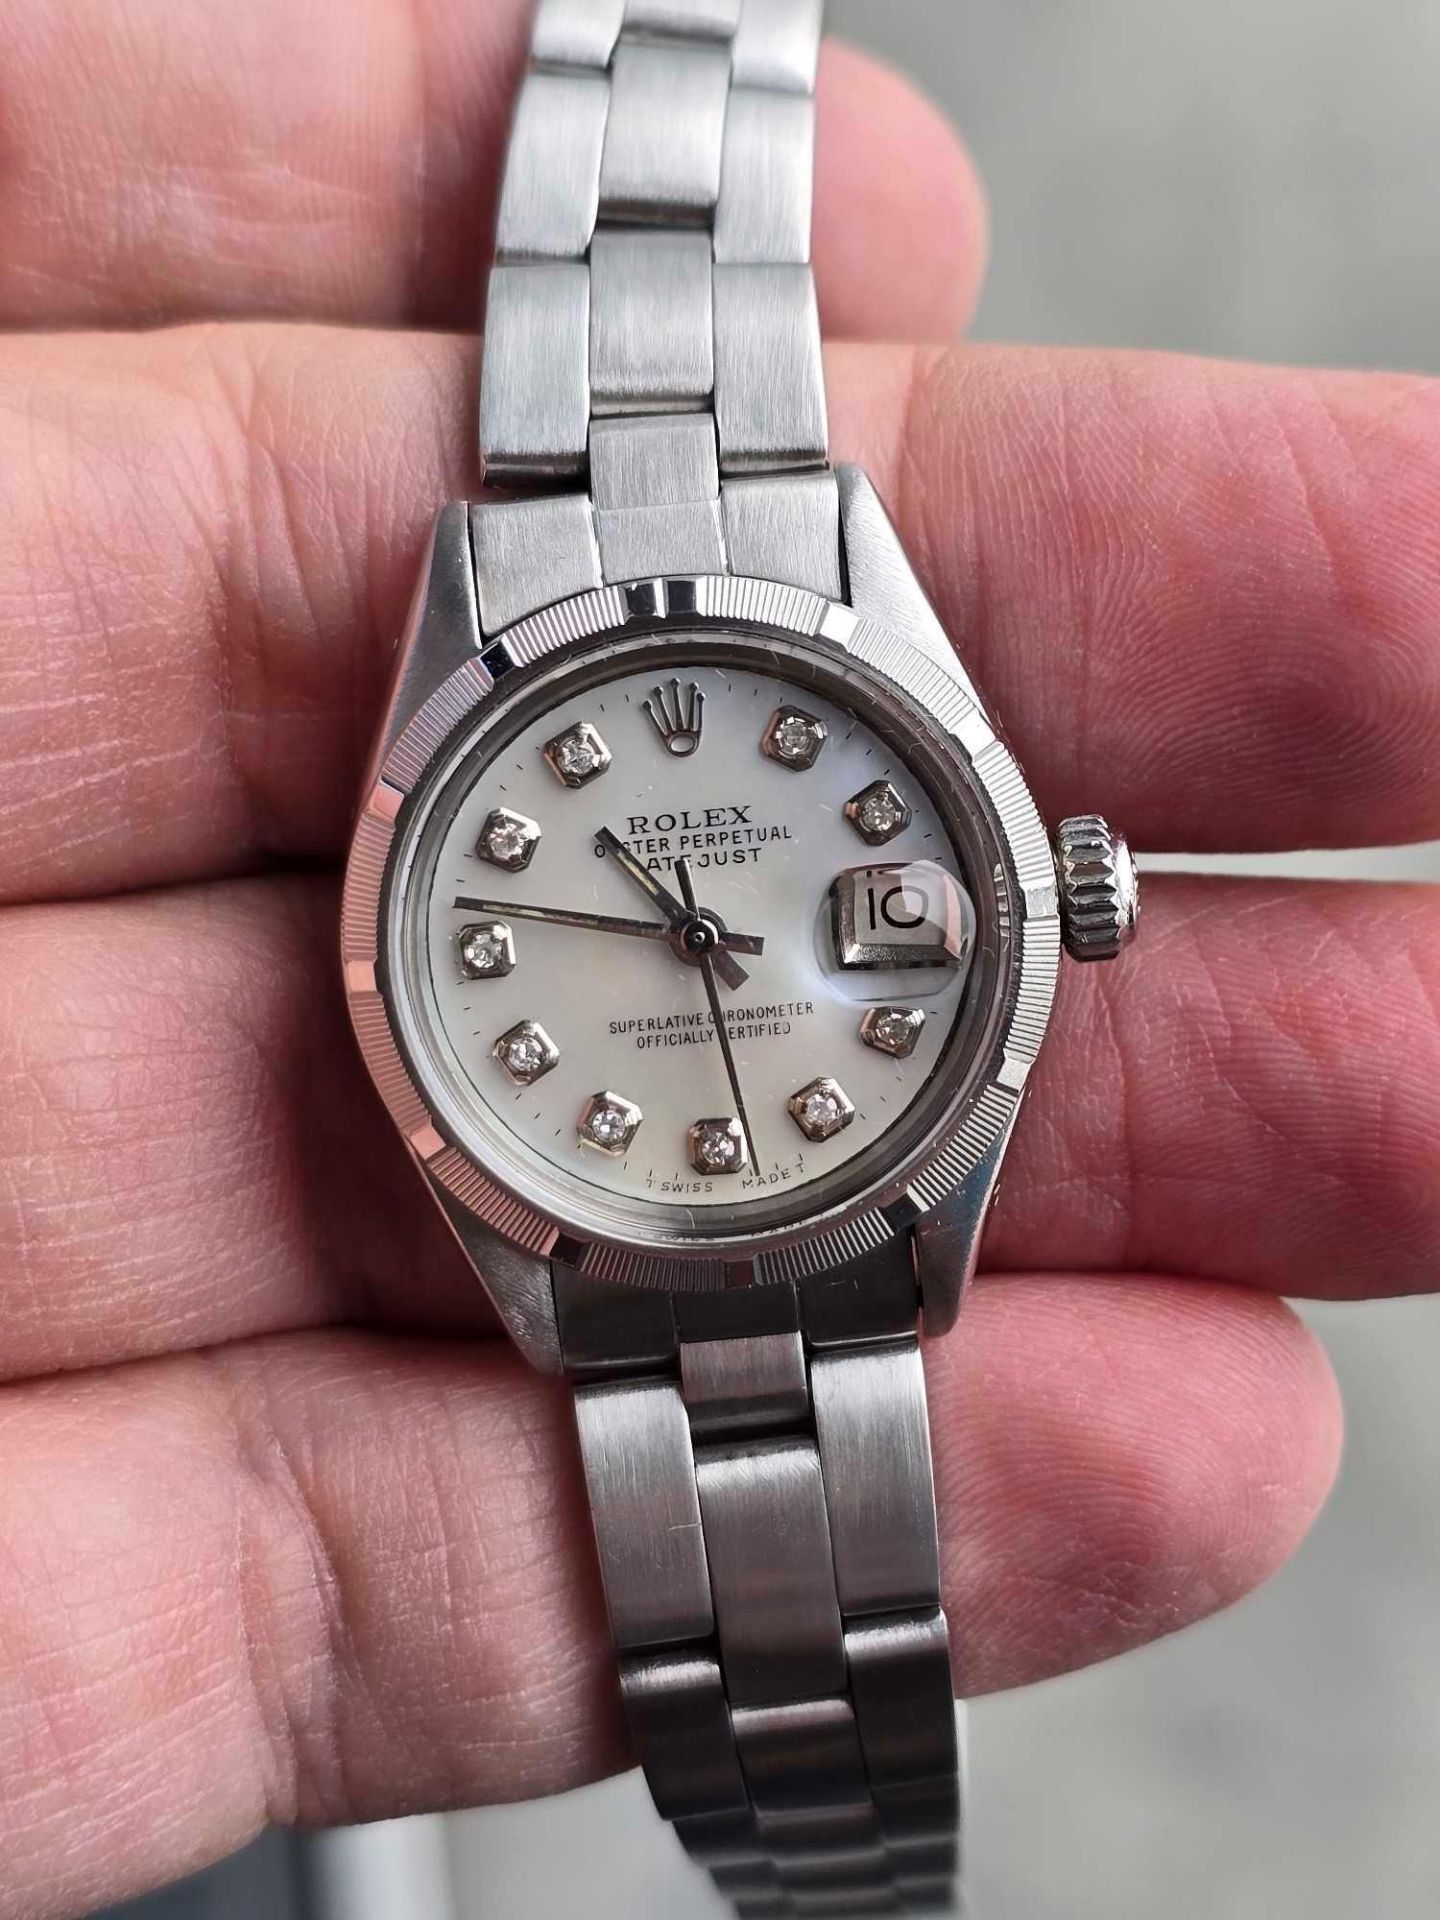 Rolex Ladies Stainless Steel Datejust, Blue Mother of Pearl Diamond Face, Oyster Band Model 6916, ru - Image 2 of 13